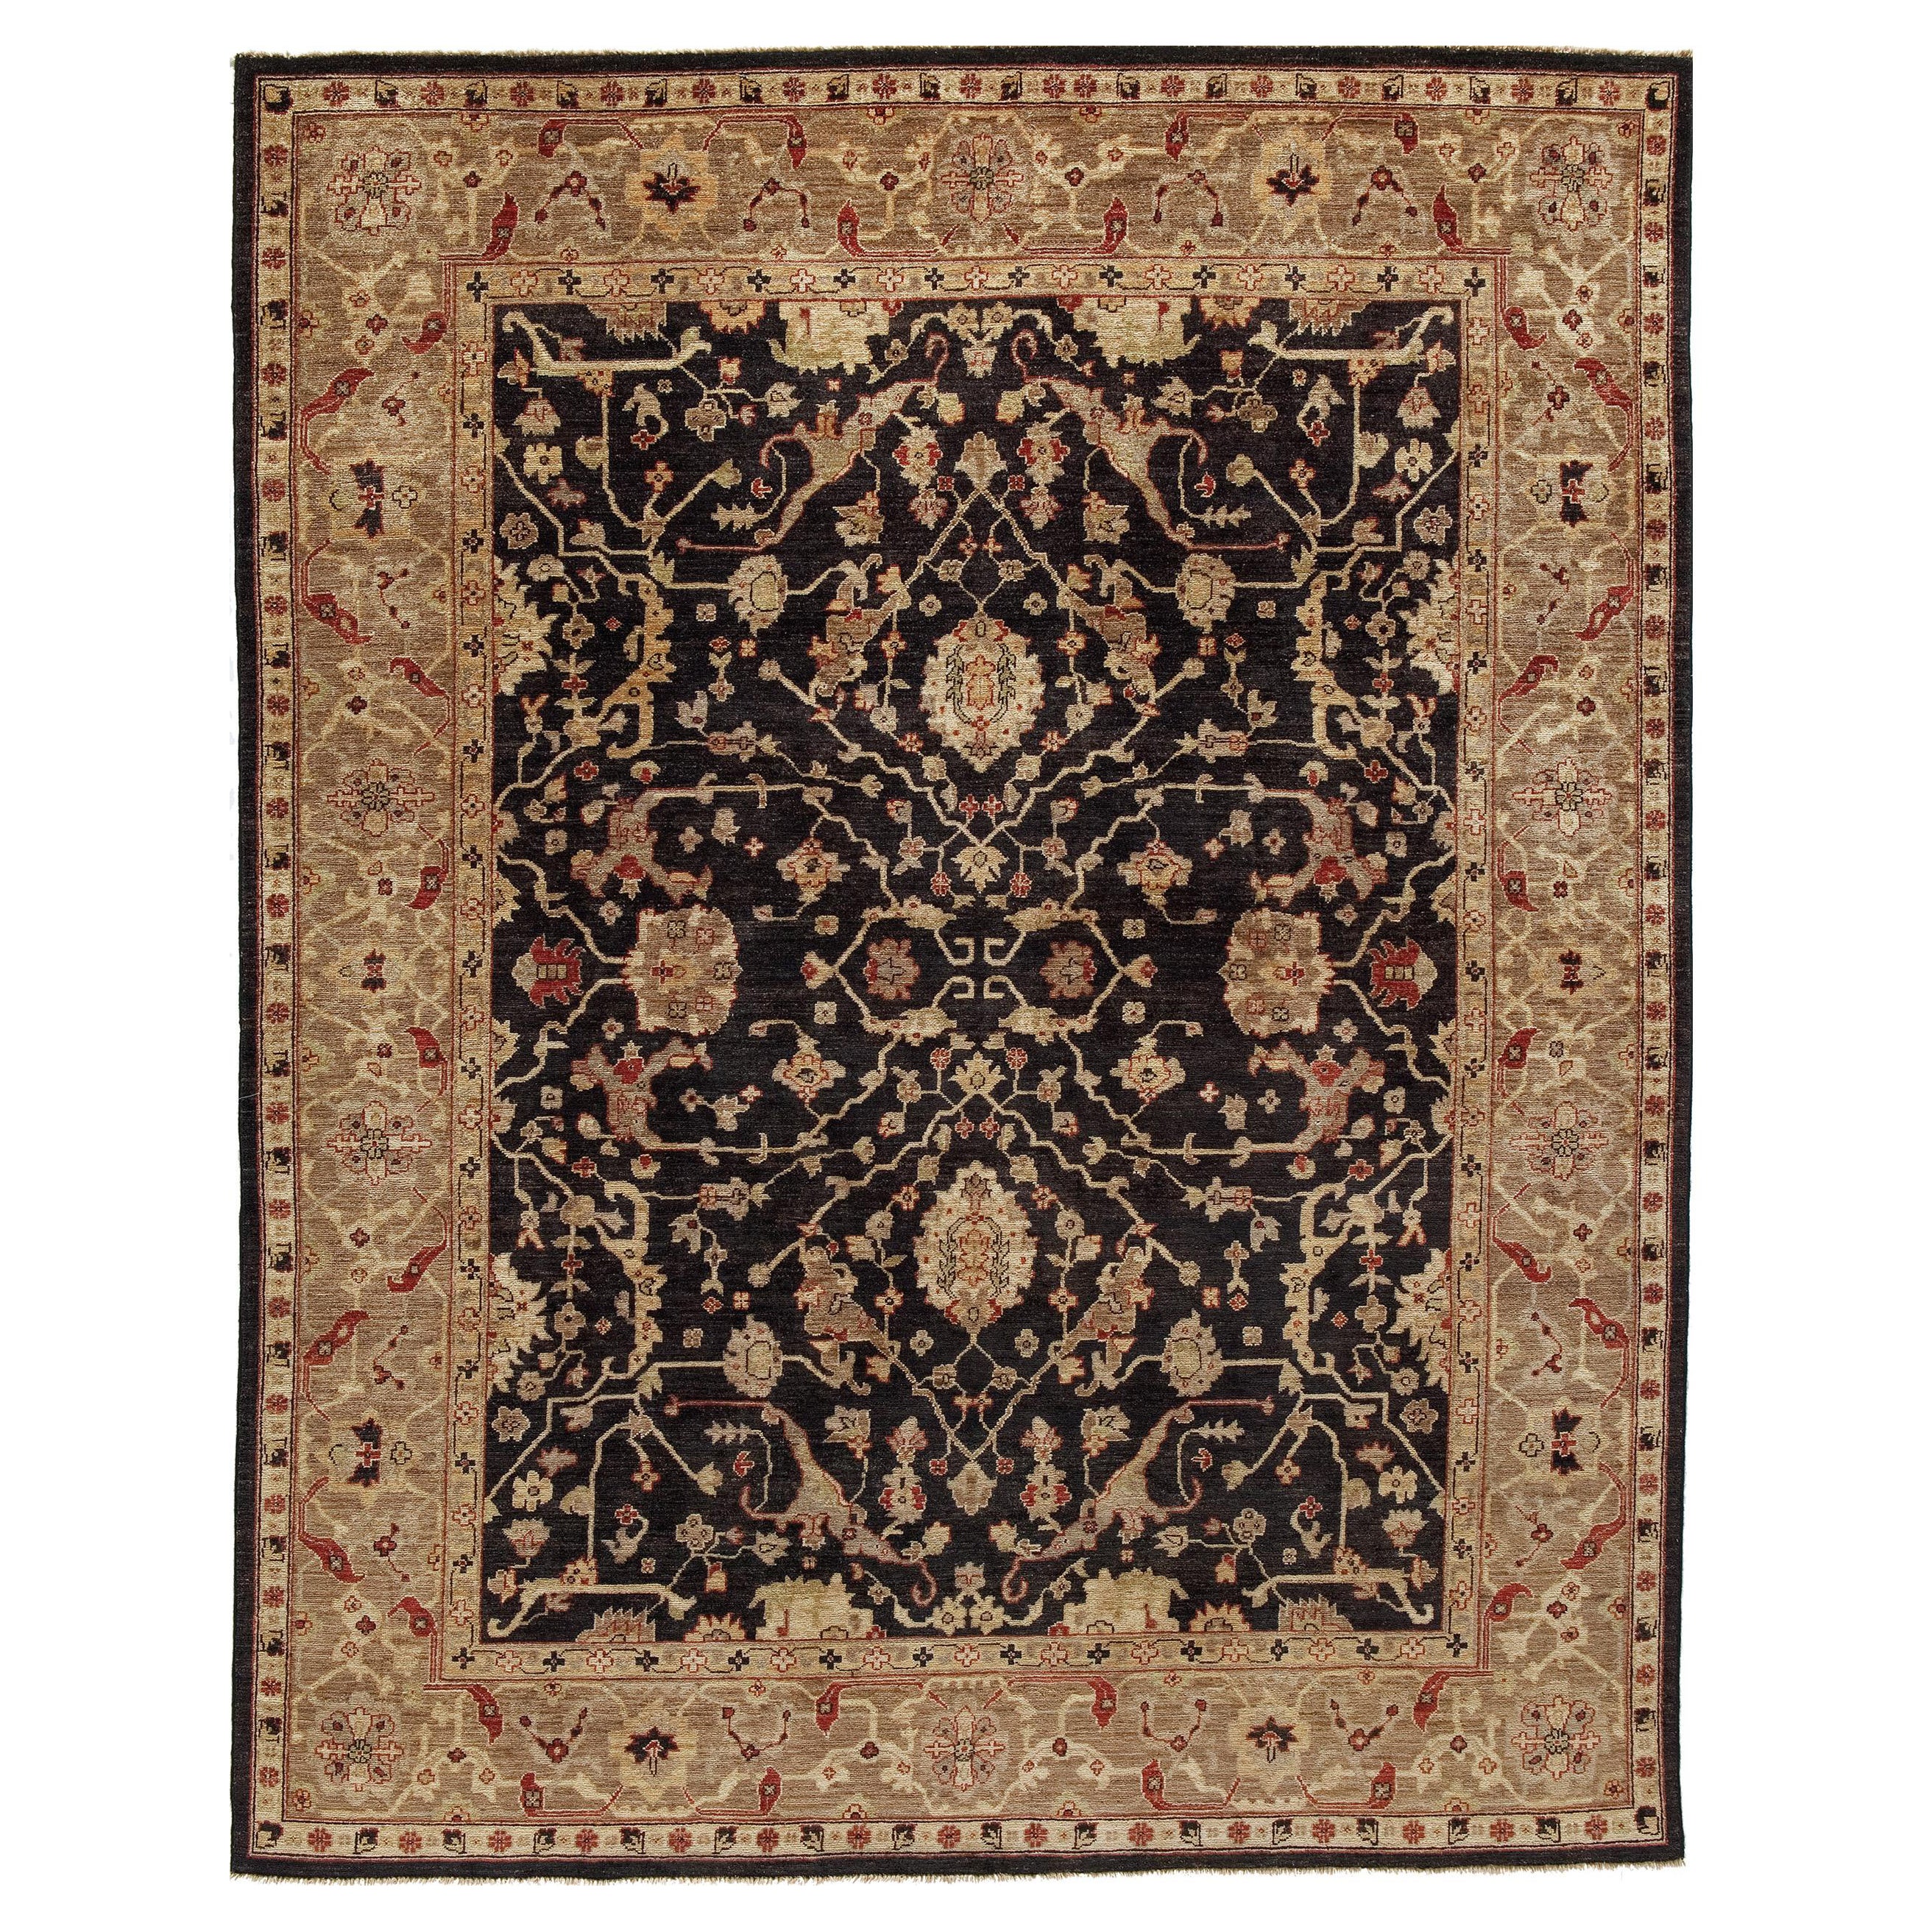 Luxury Traditional Hand-Knotted Farahan Black & Gold 16x20 Rug